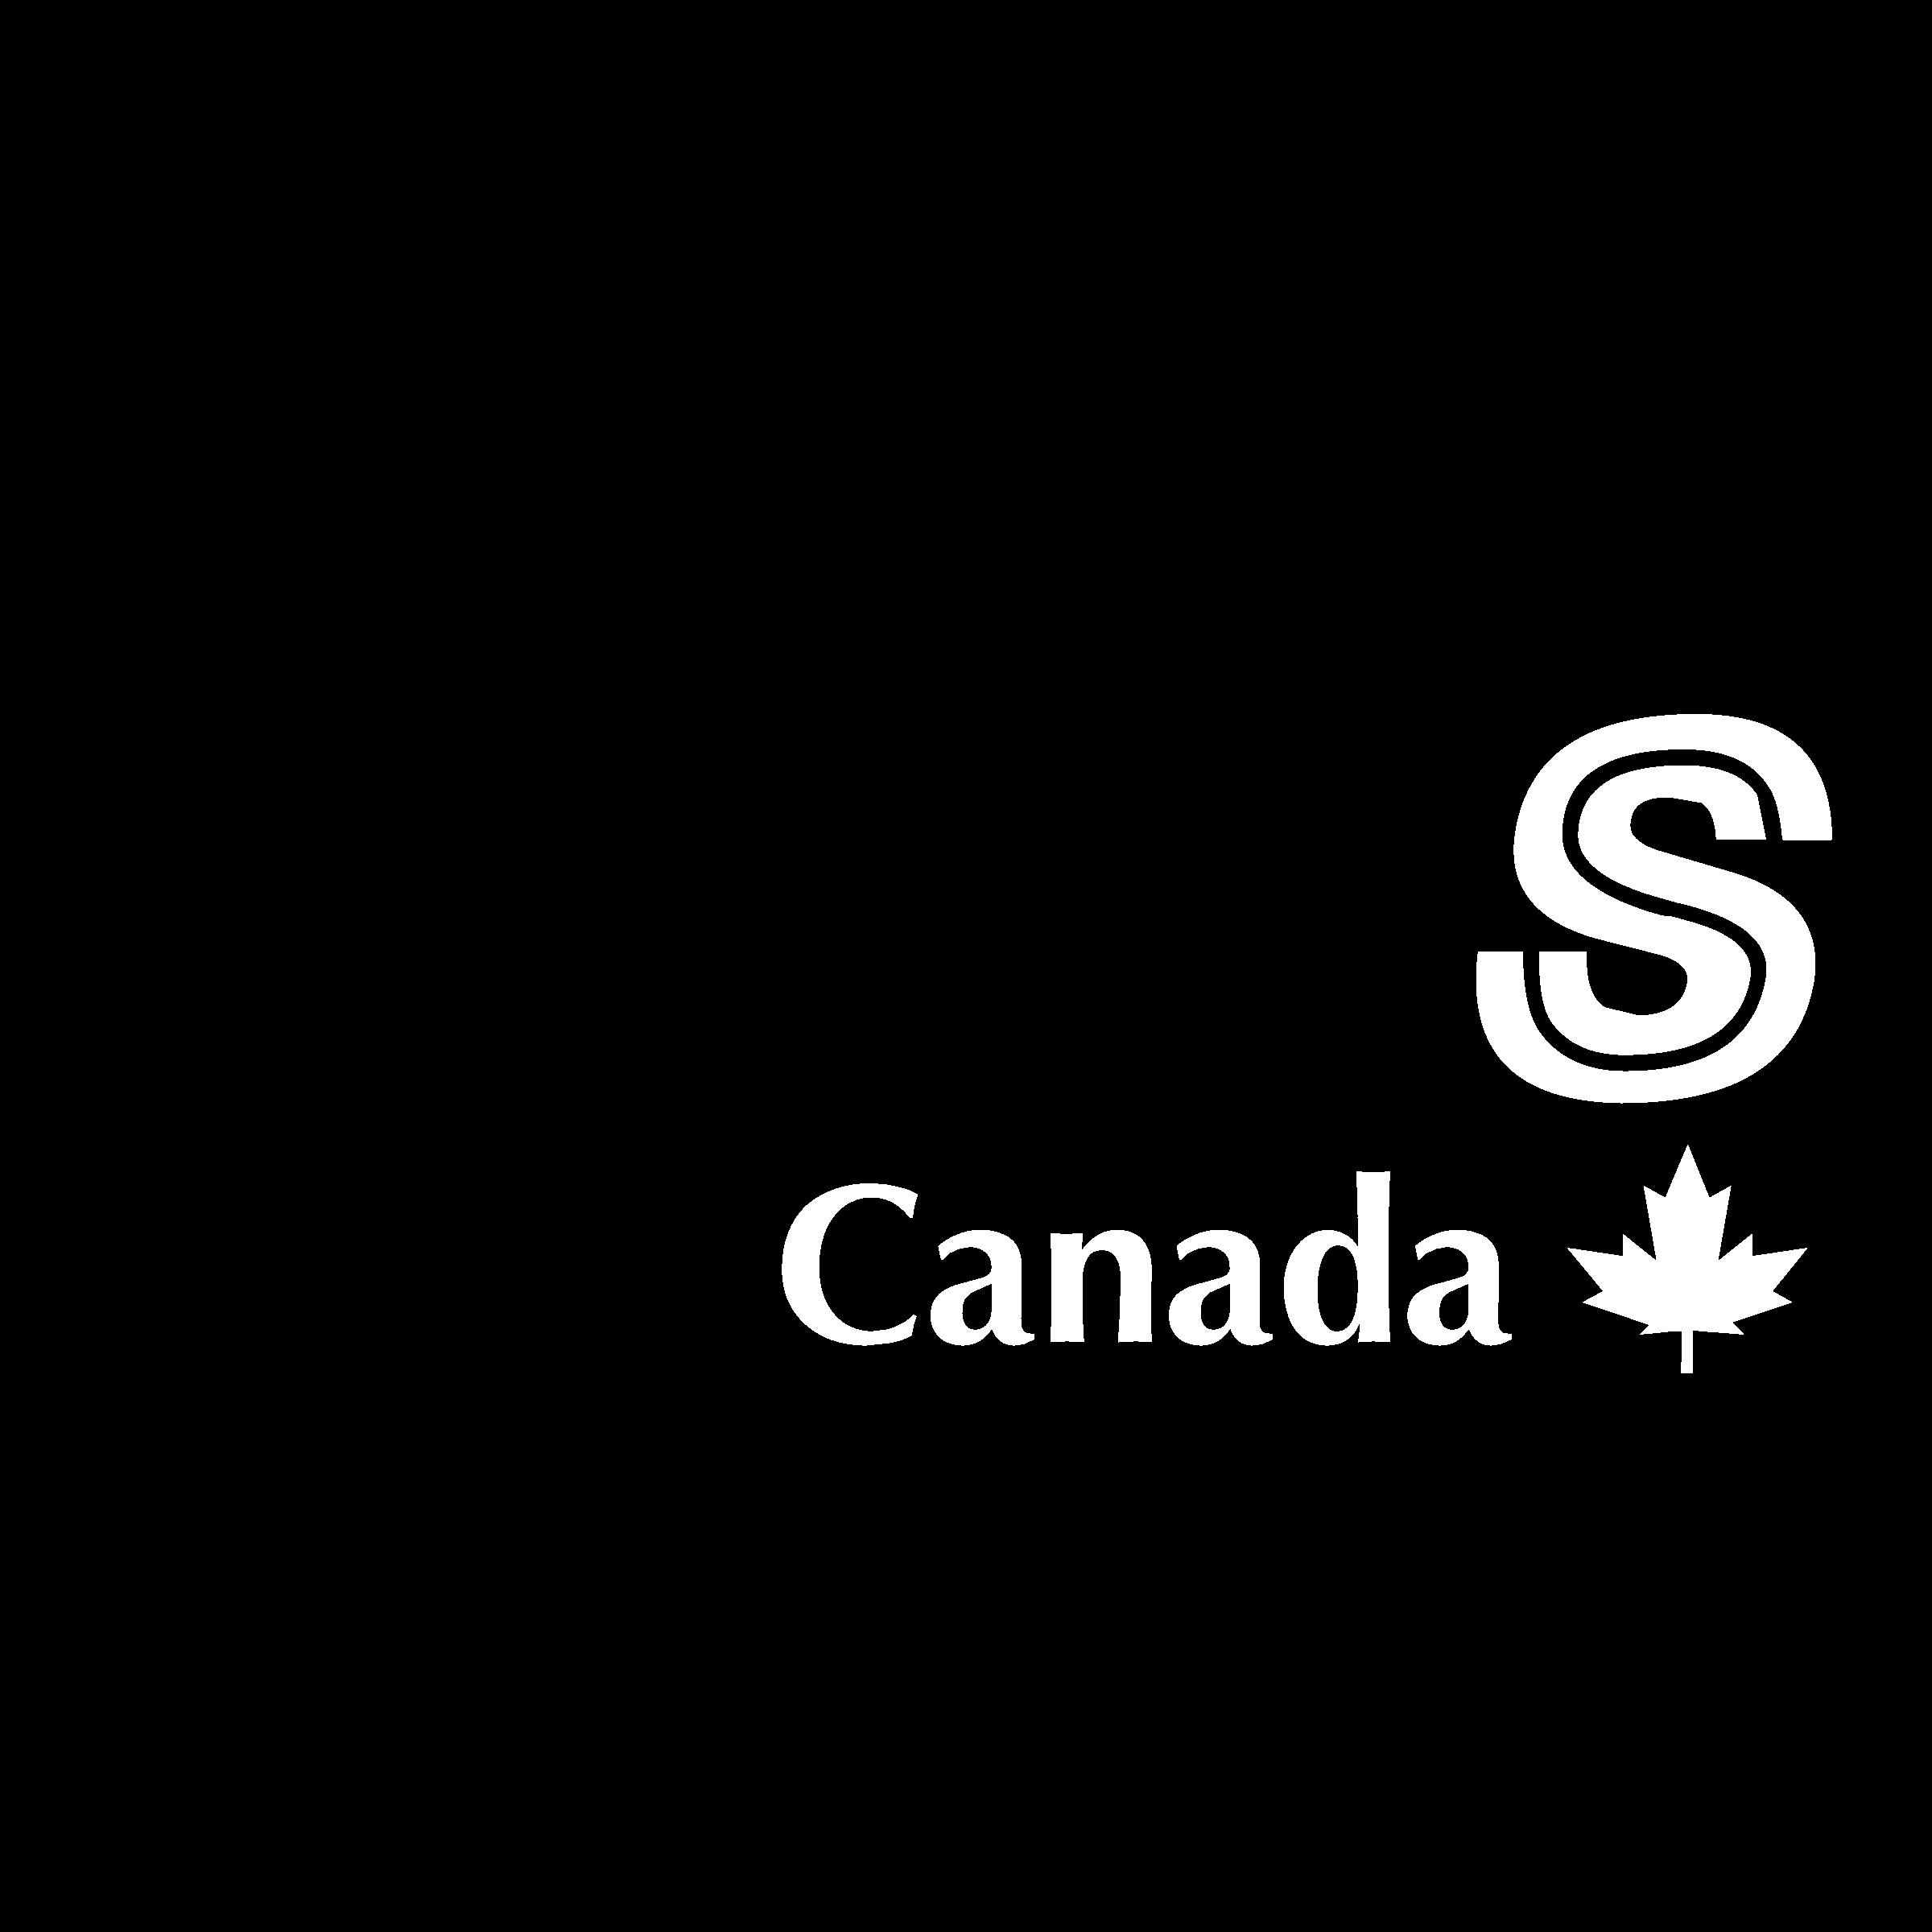 Sears White Logo - Sears Canada Logo PNG Transparent & SVG Vector - Freebie Supply